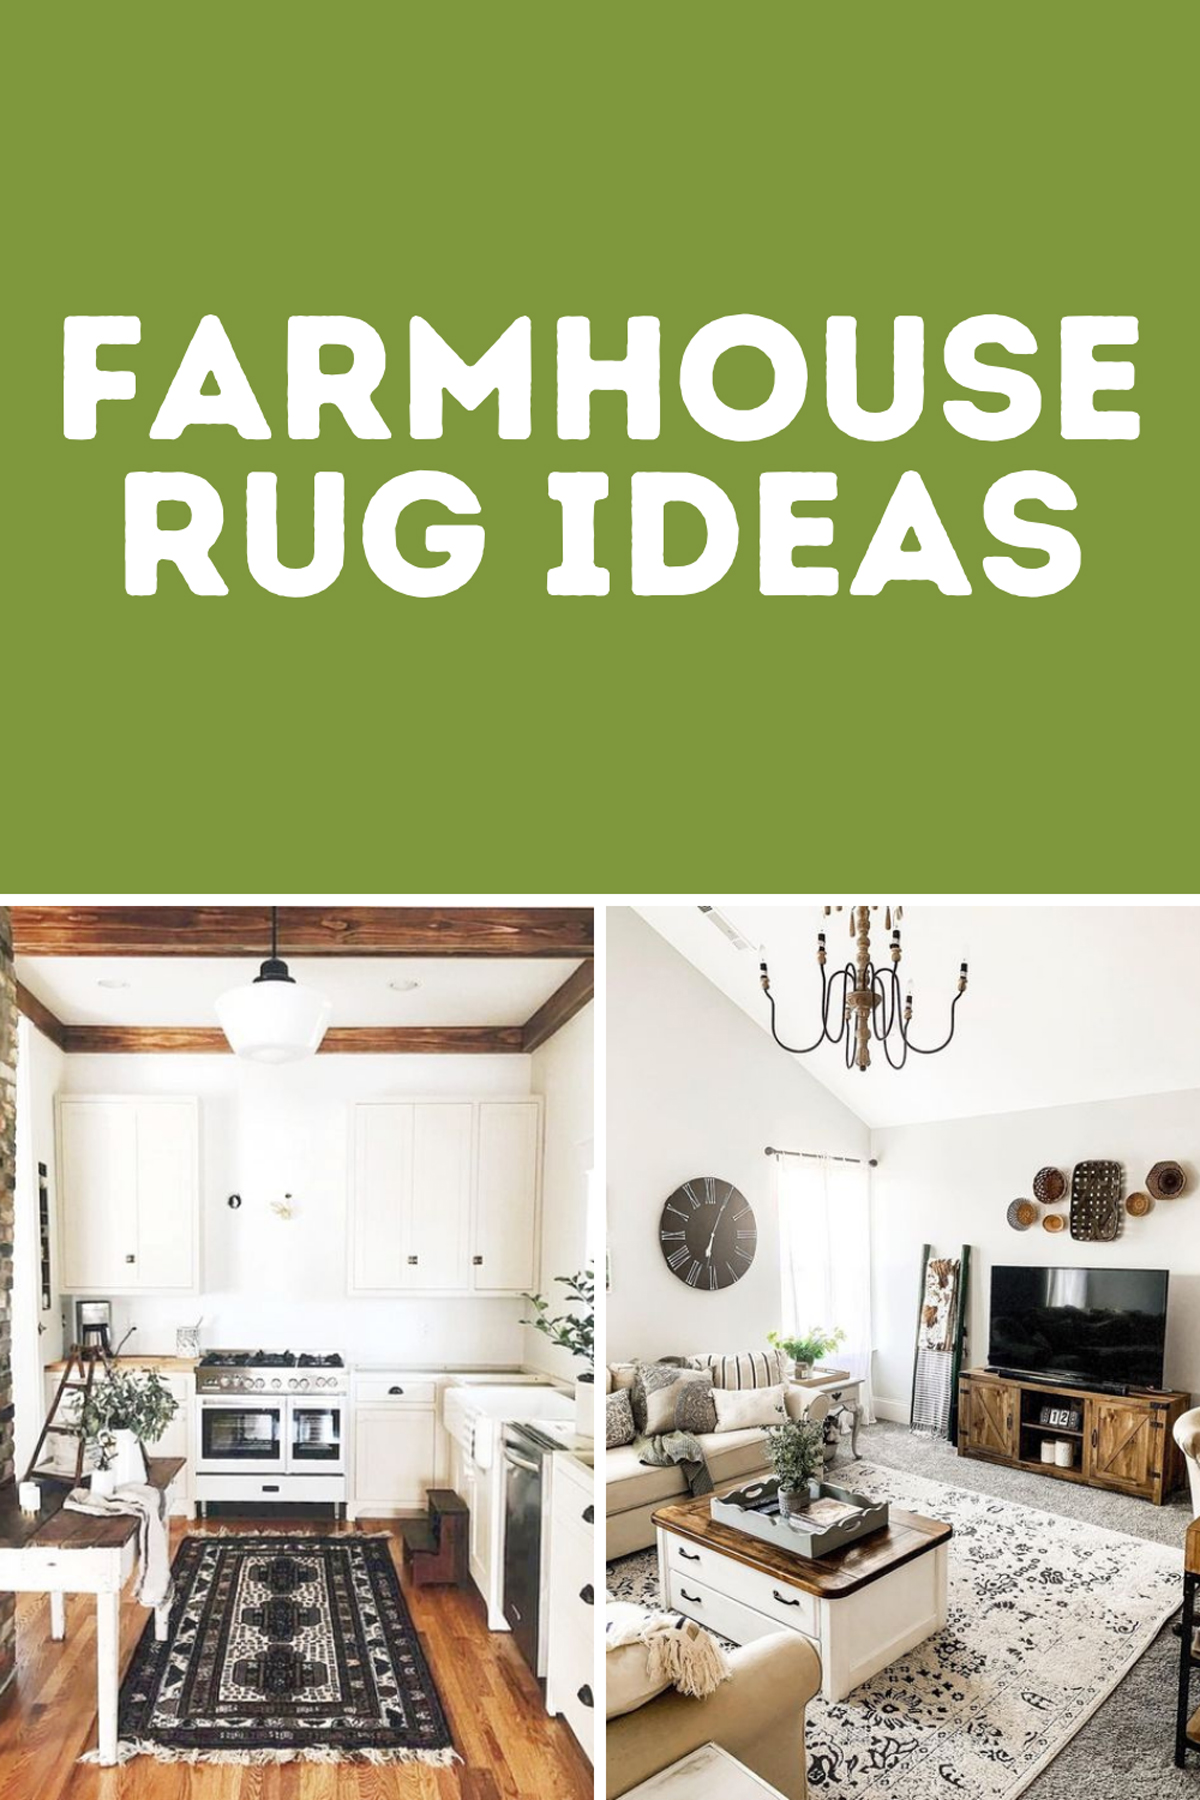 Rustic Home Decor With Rugs